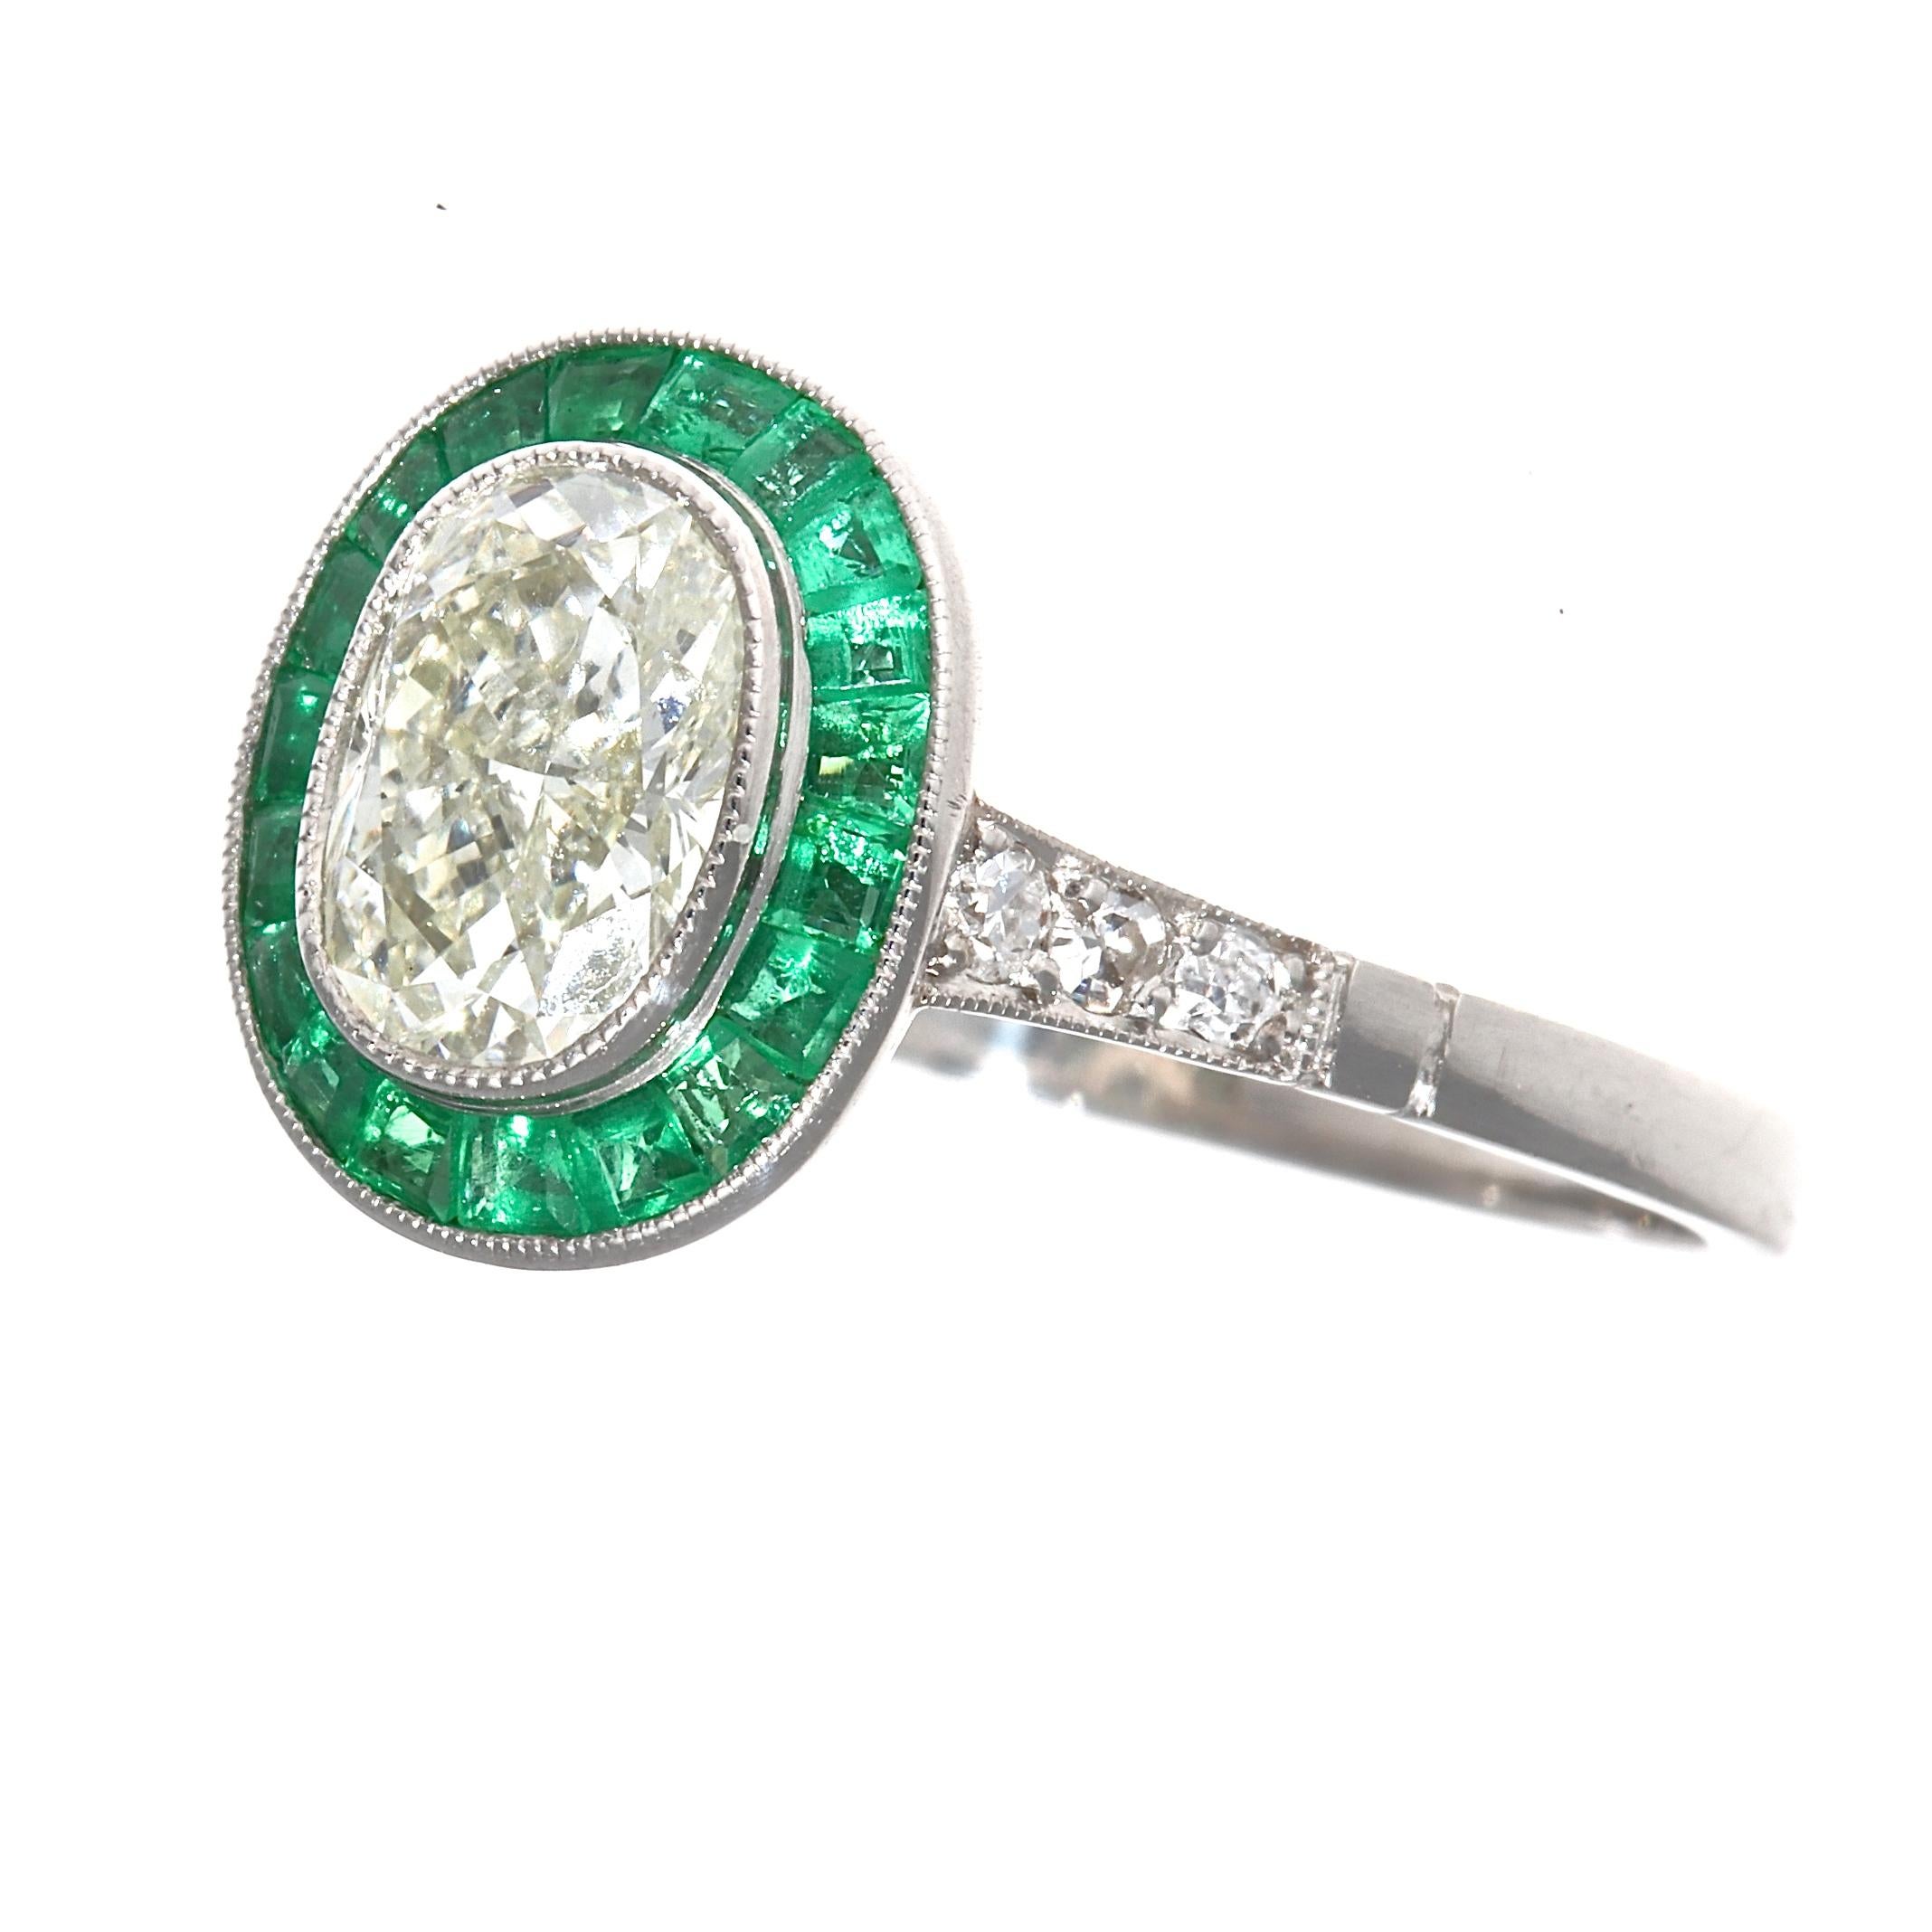 A design driven by colorful passion giving devotion to the art deco time period. Featuring a 1.01 carat oval cut diamond that is L color, SI1 clarity. Brilliantly surrounded by a vibrant green halo of calibrated emeralds specially cut to mirror the